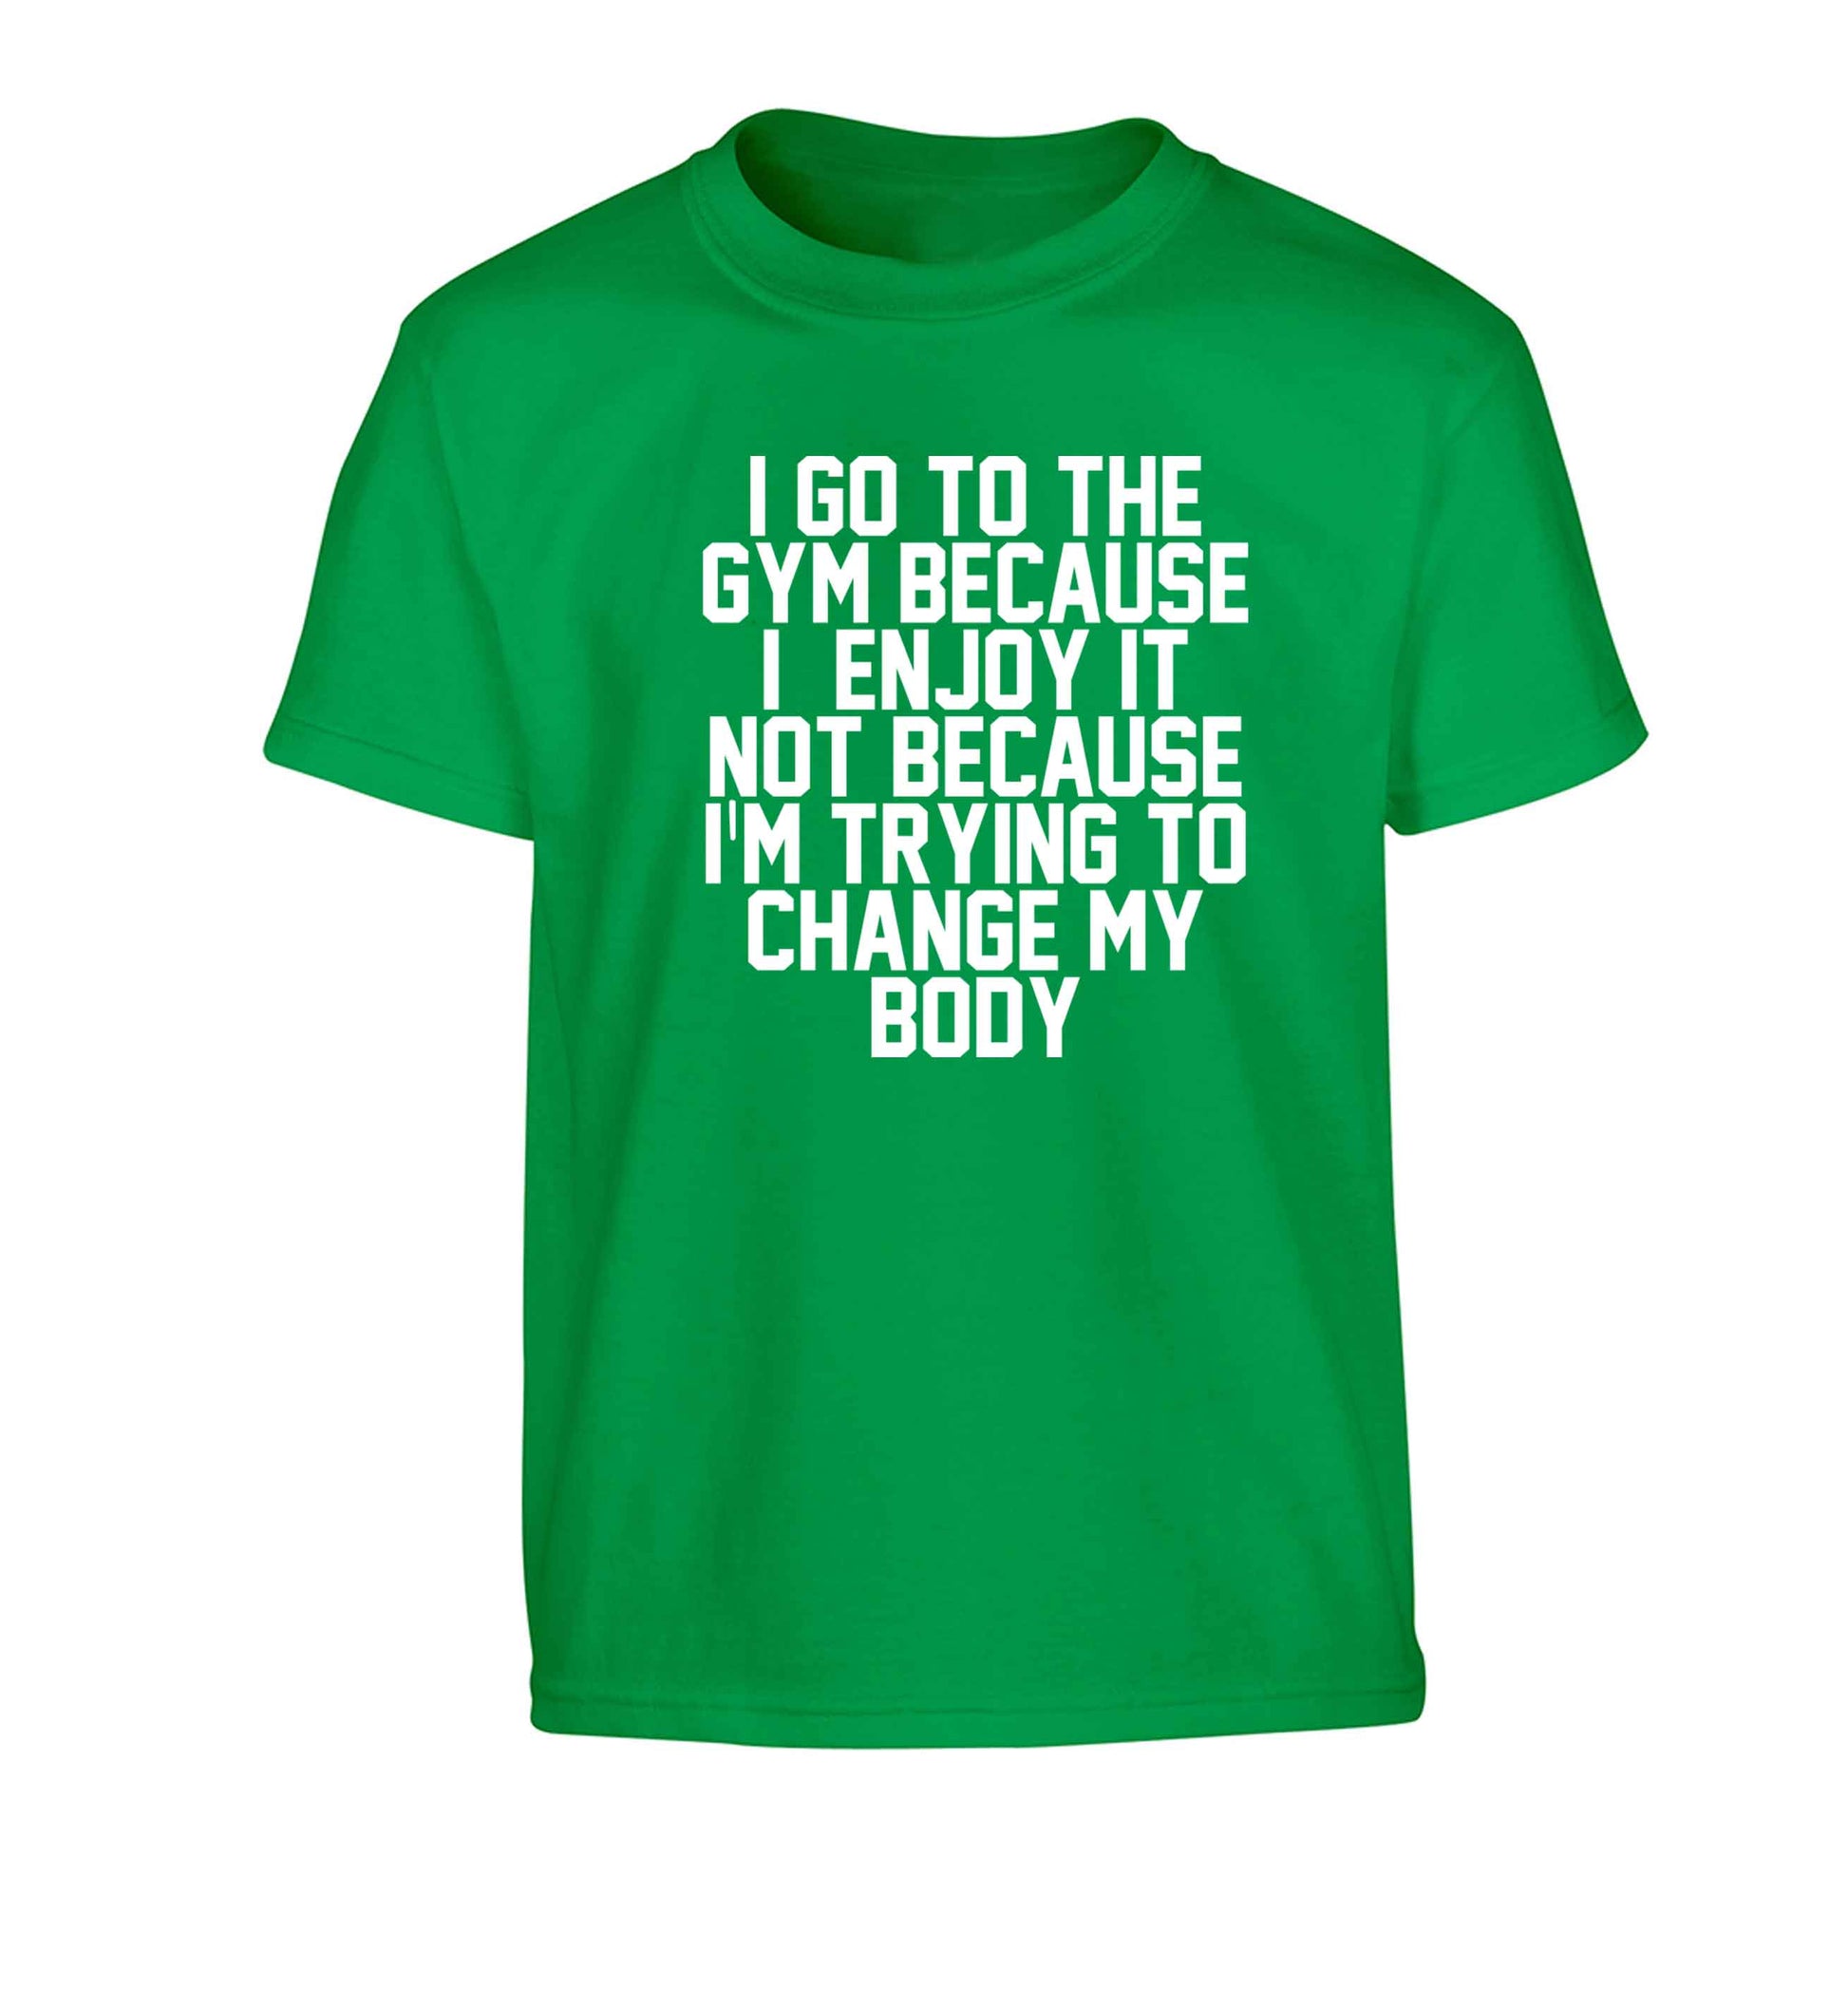 I go to the gym because I enjoy it not because I'm trying to change my body Children's green Tshirt 12-13 Years